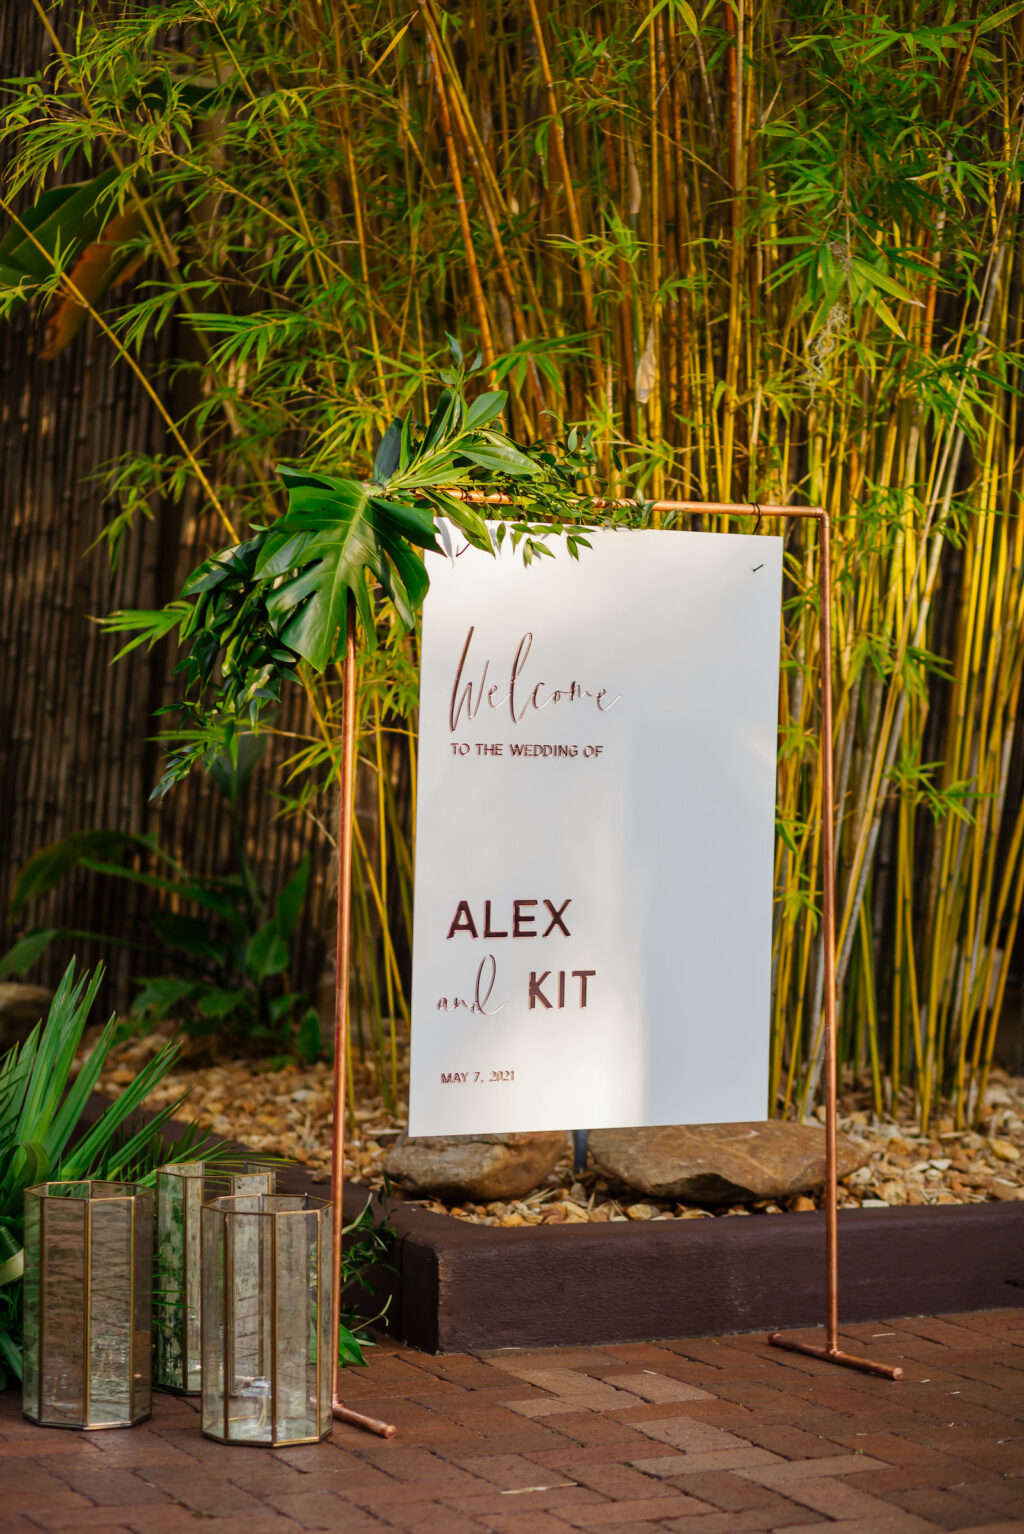 Tropical Inspired Florida Wedding Reception and Decor, Minimalist Gold Welcome Sign in Bamboo Courtyard | Unique Florida Wedding Venue NOVA 535 in Downtown St. Pete